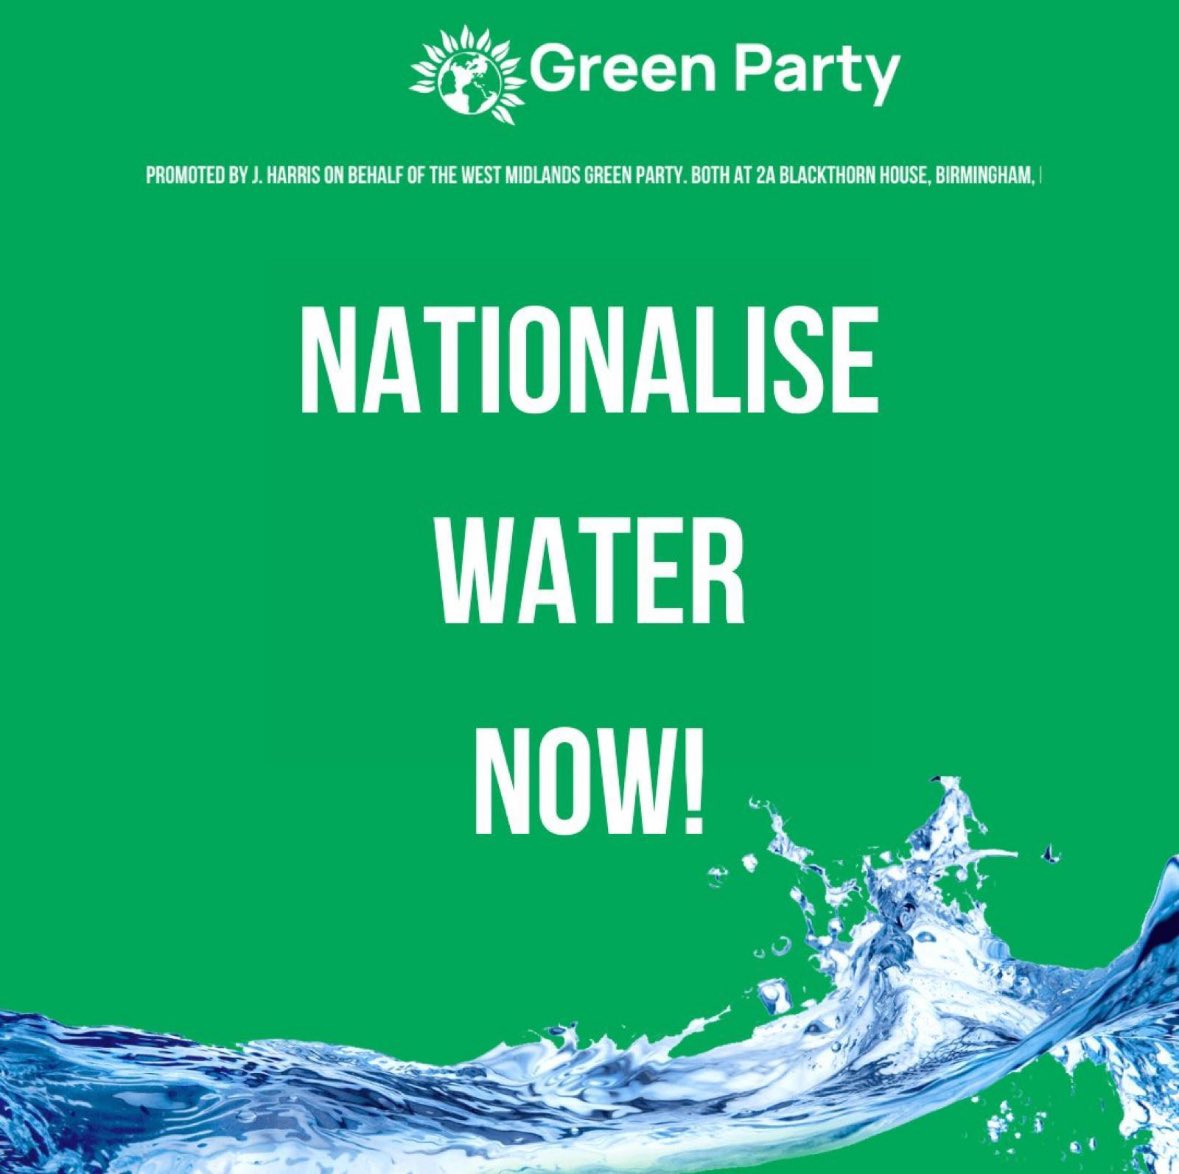 Water should be managed for the common good. Not as a commodity to enrich rapacious investors with no care for people or planet. @TheGreenParty would nationalise water now 💚👇